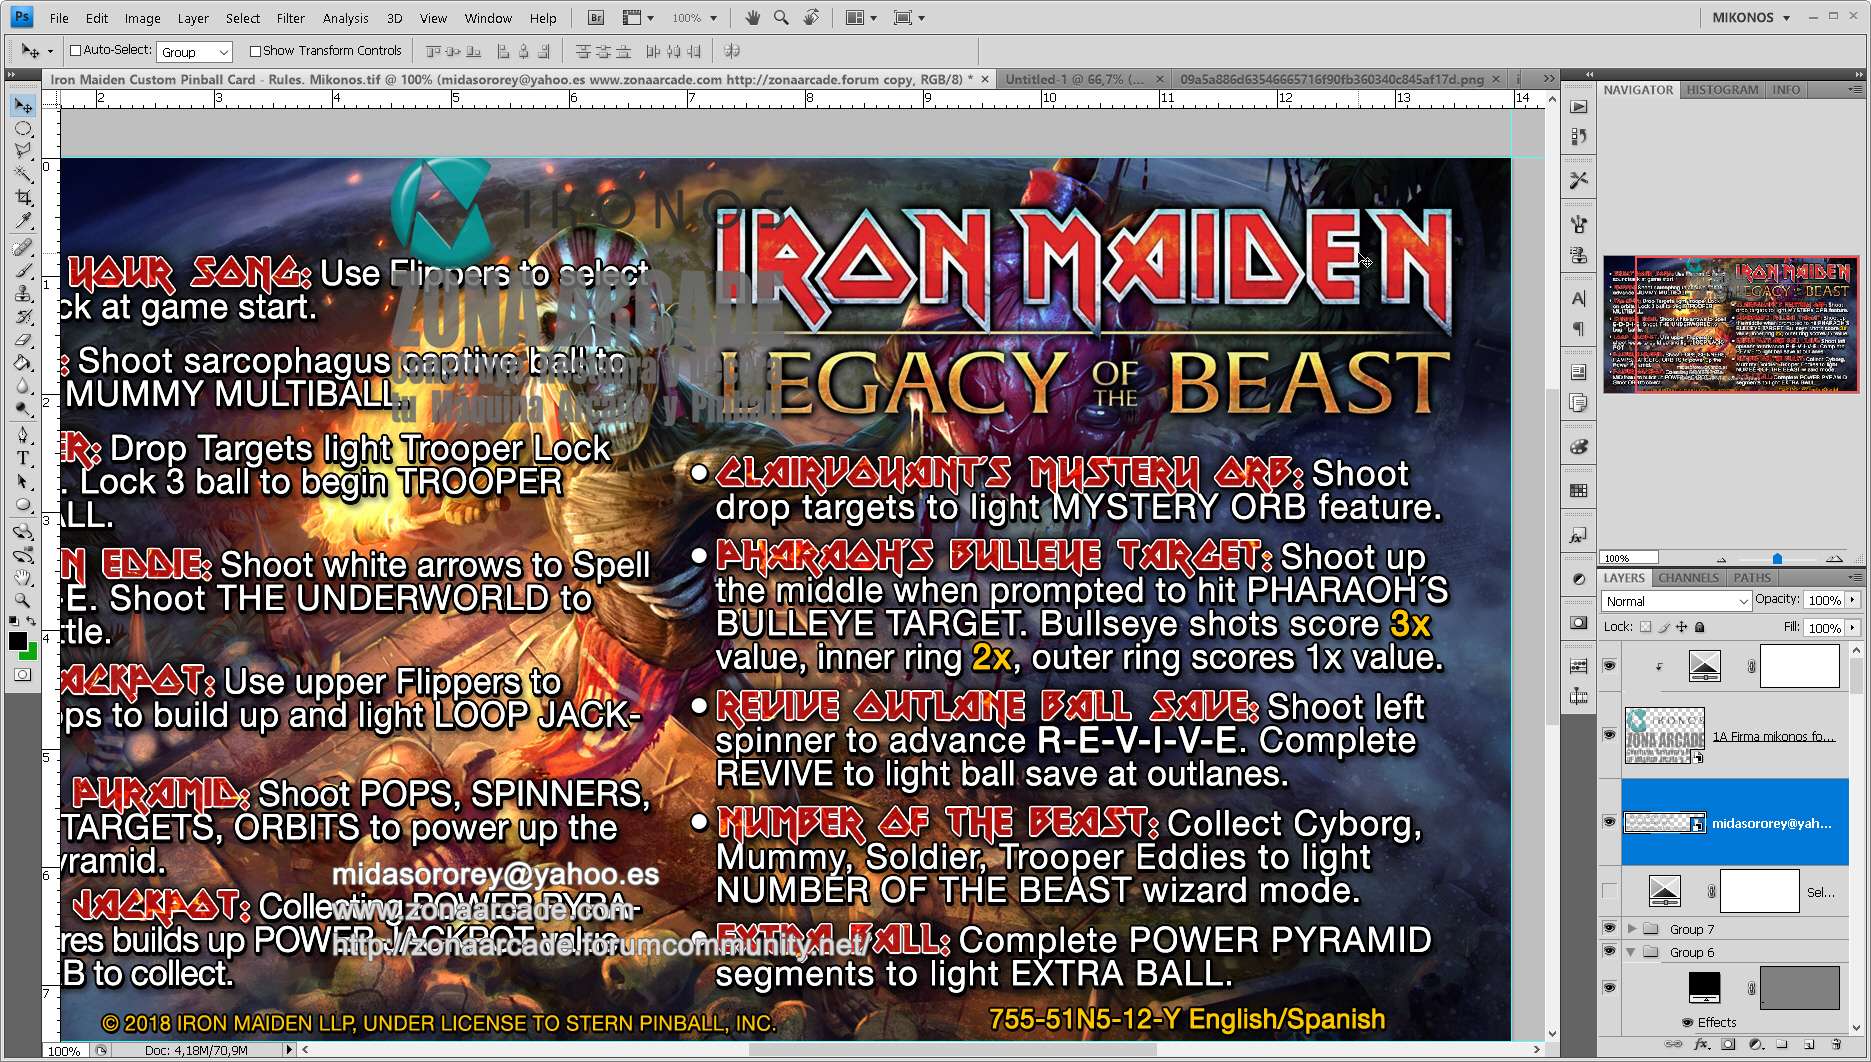 Iron Maiden Legacy of the Beast Pinball Card Customized - Rules. Mikonos1